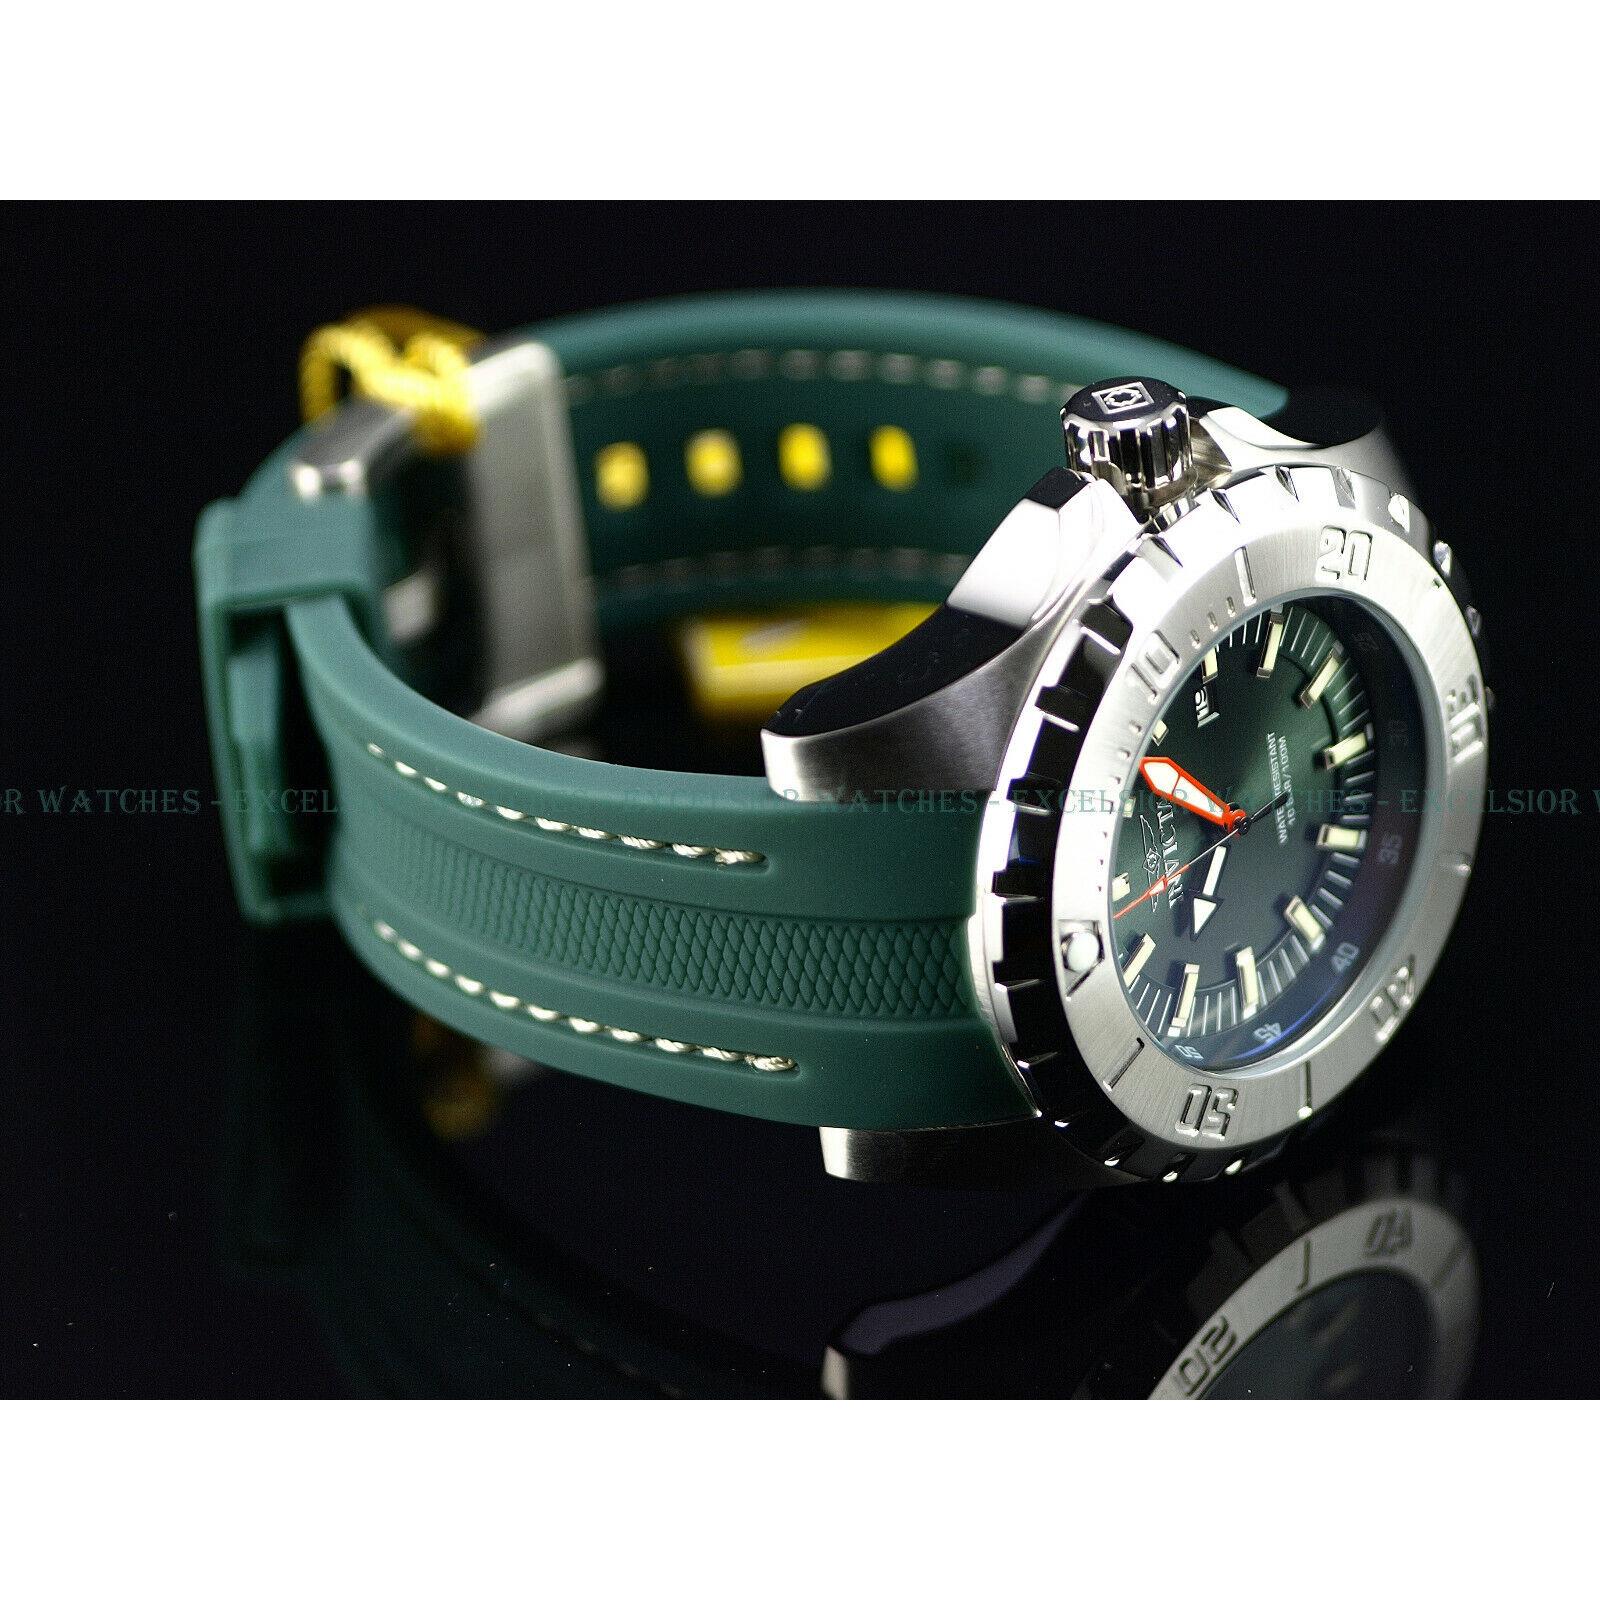 Invicta watch Pro Diver - Green Dial, Green Band, Silver Bezel